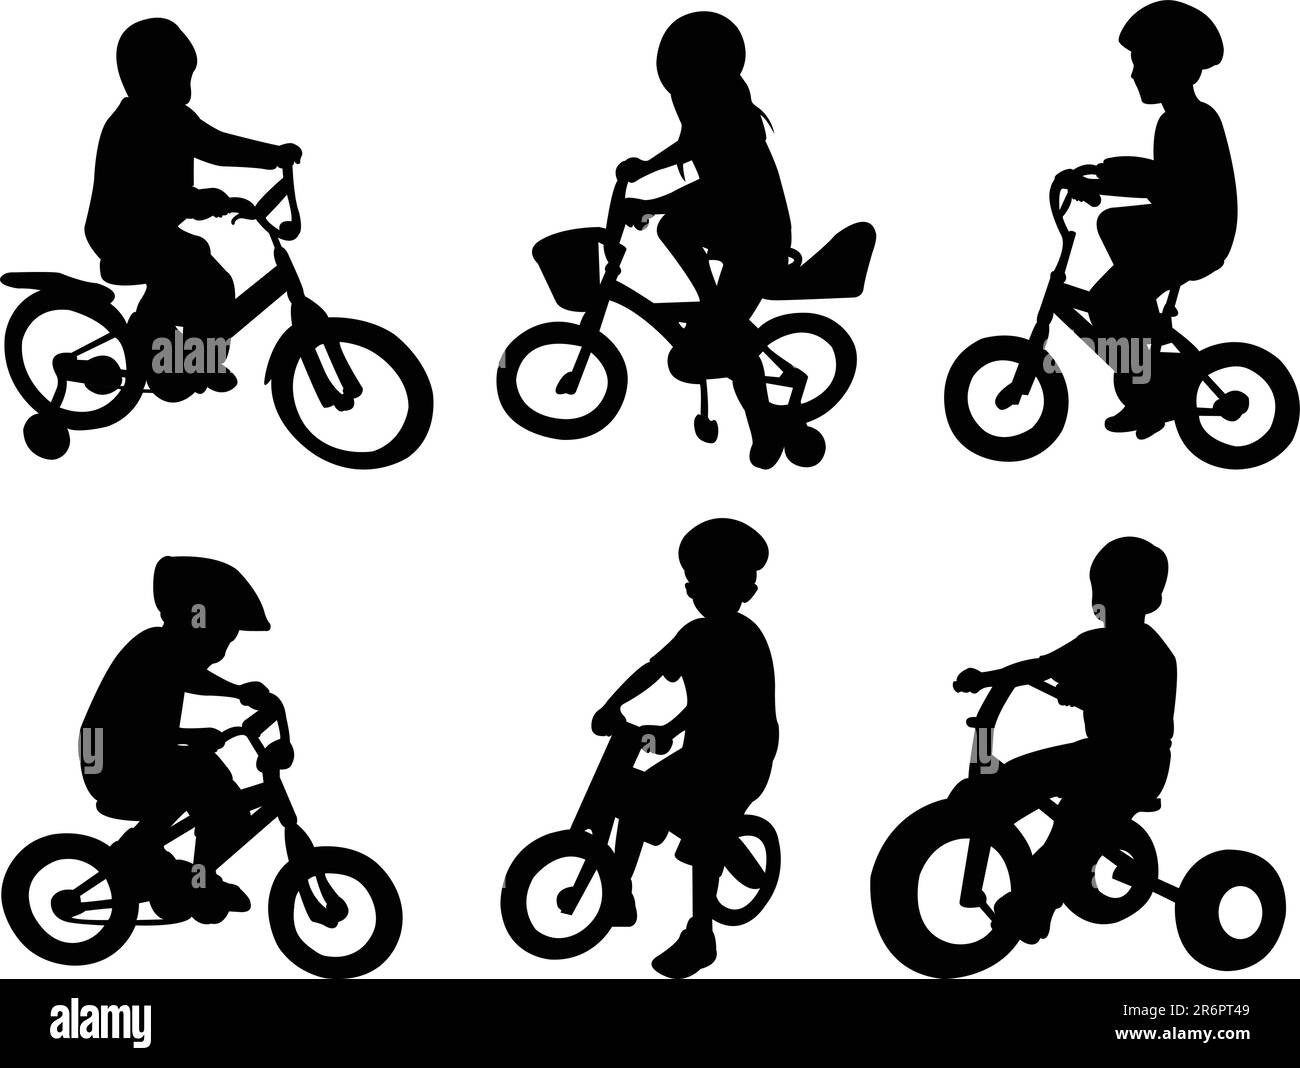 silhouettes of children riding bicycles - vector Stock Vector